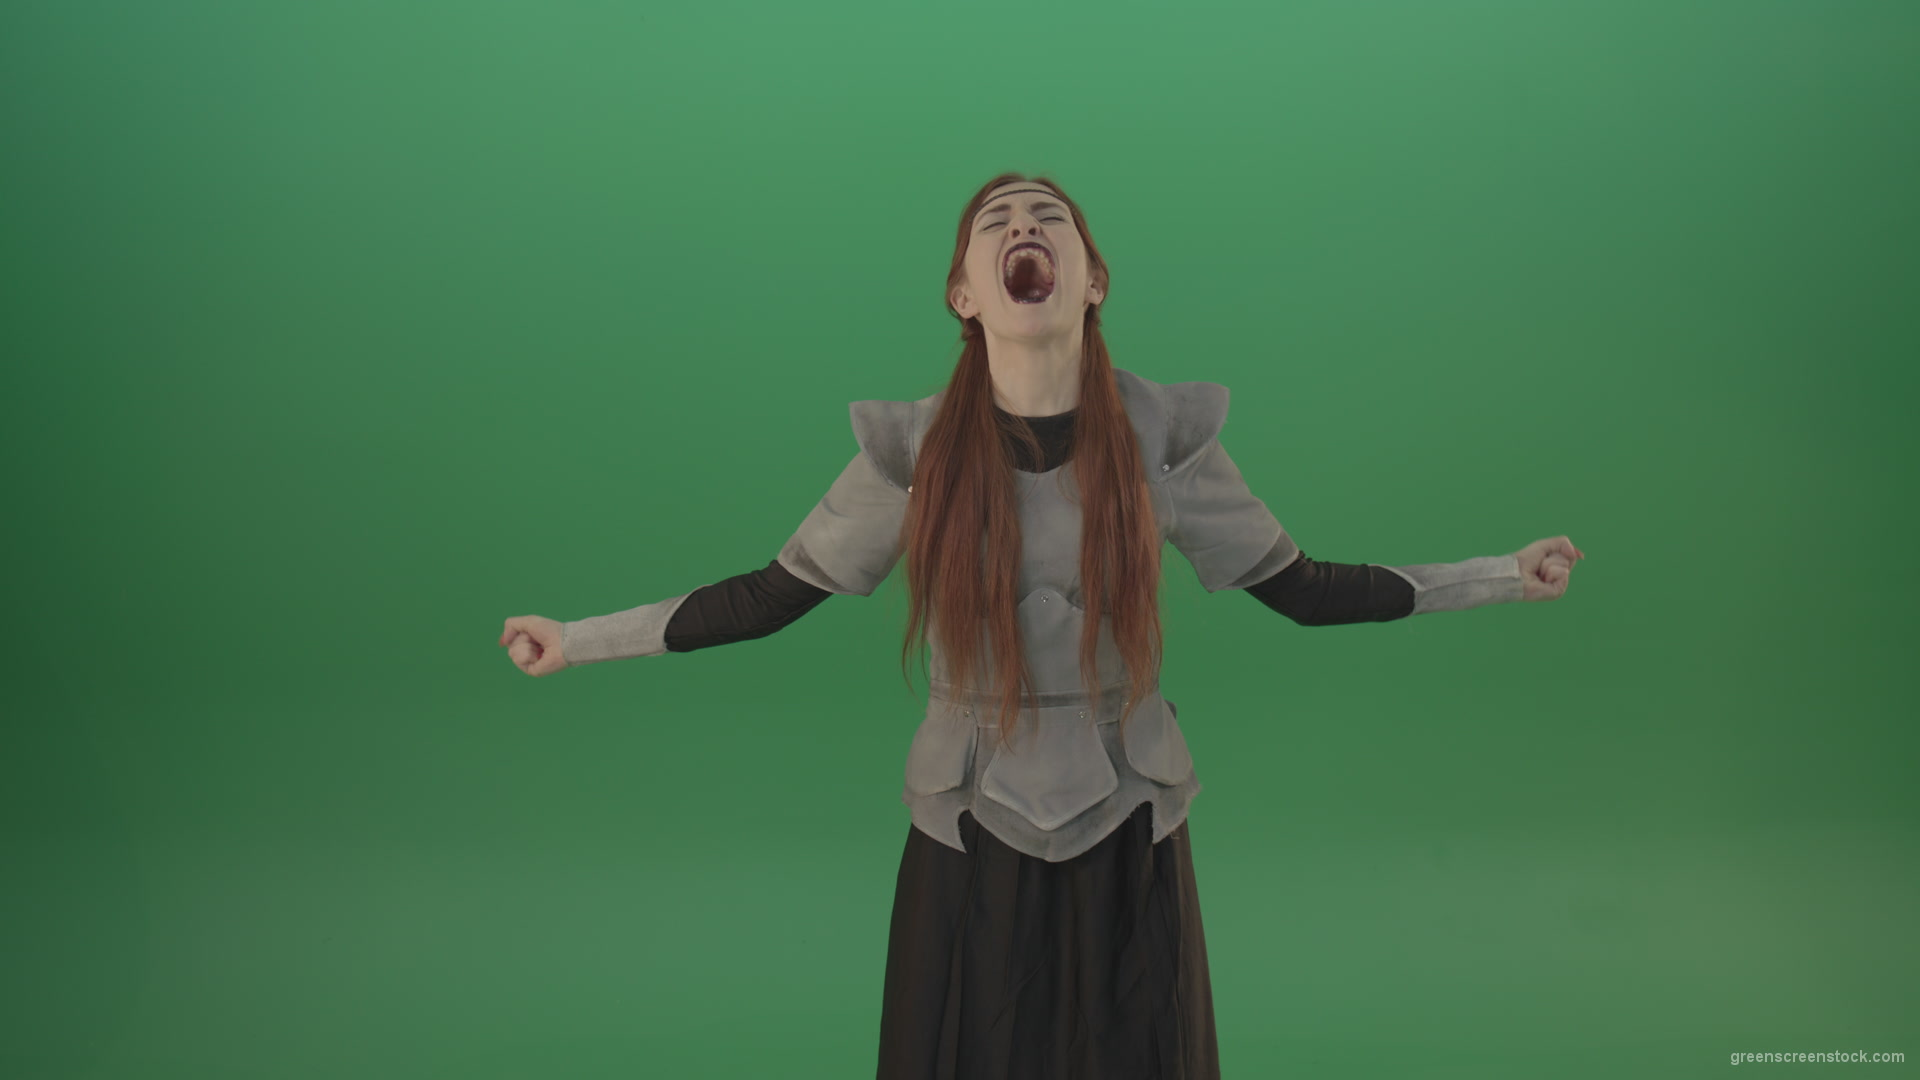 Cried-warrior-girl-releases-all-her-energy-cosplay-on-a-green-background_007 Green Screen Stock